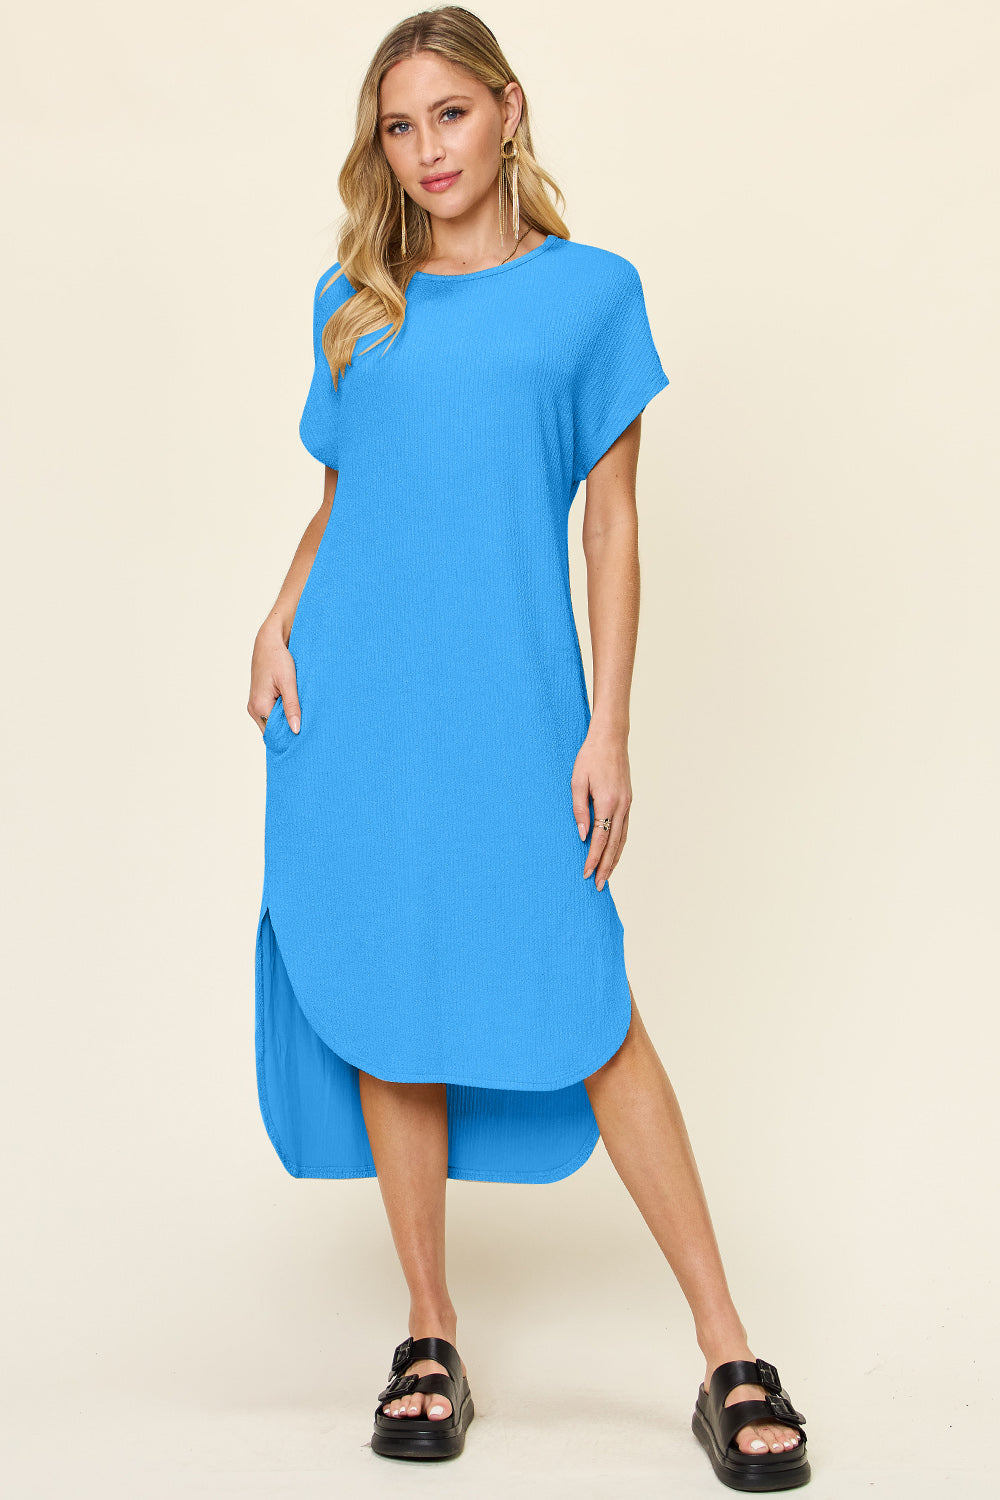 Double Take Full-Size Round Neck Short Sleeve Slit Dress - High Low Hem and Stretchy Comfort